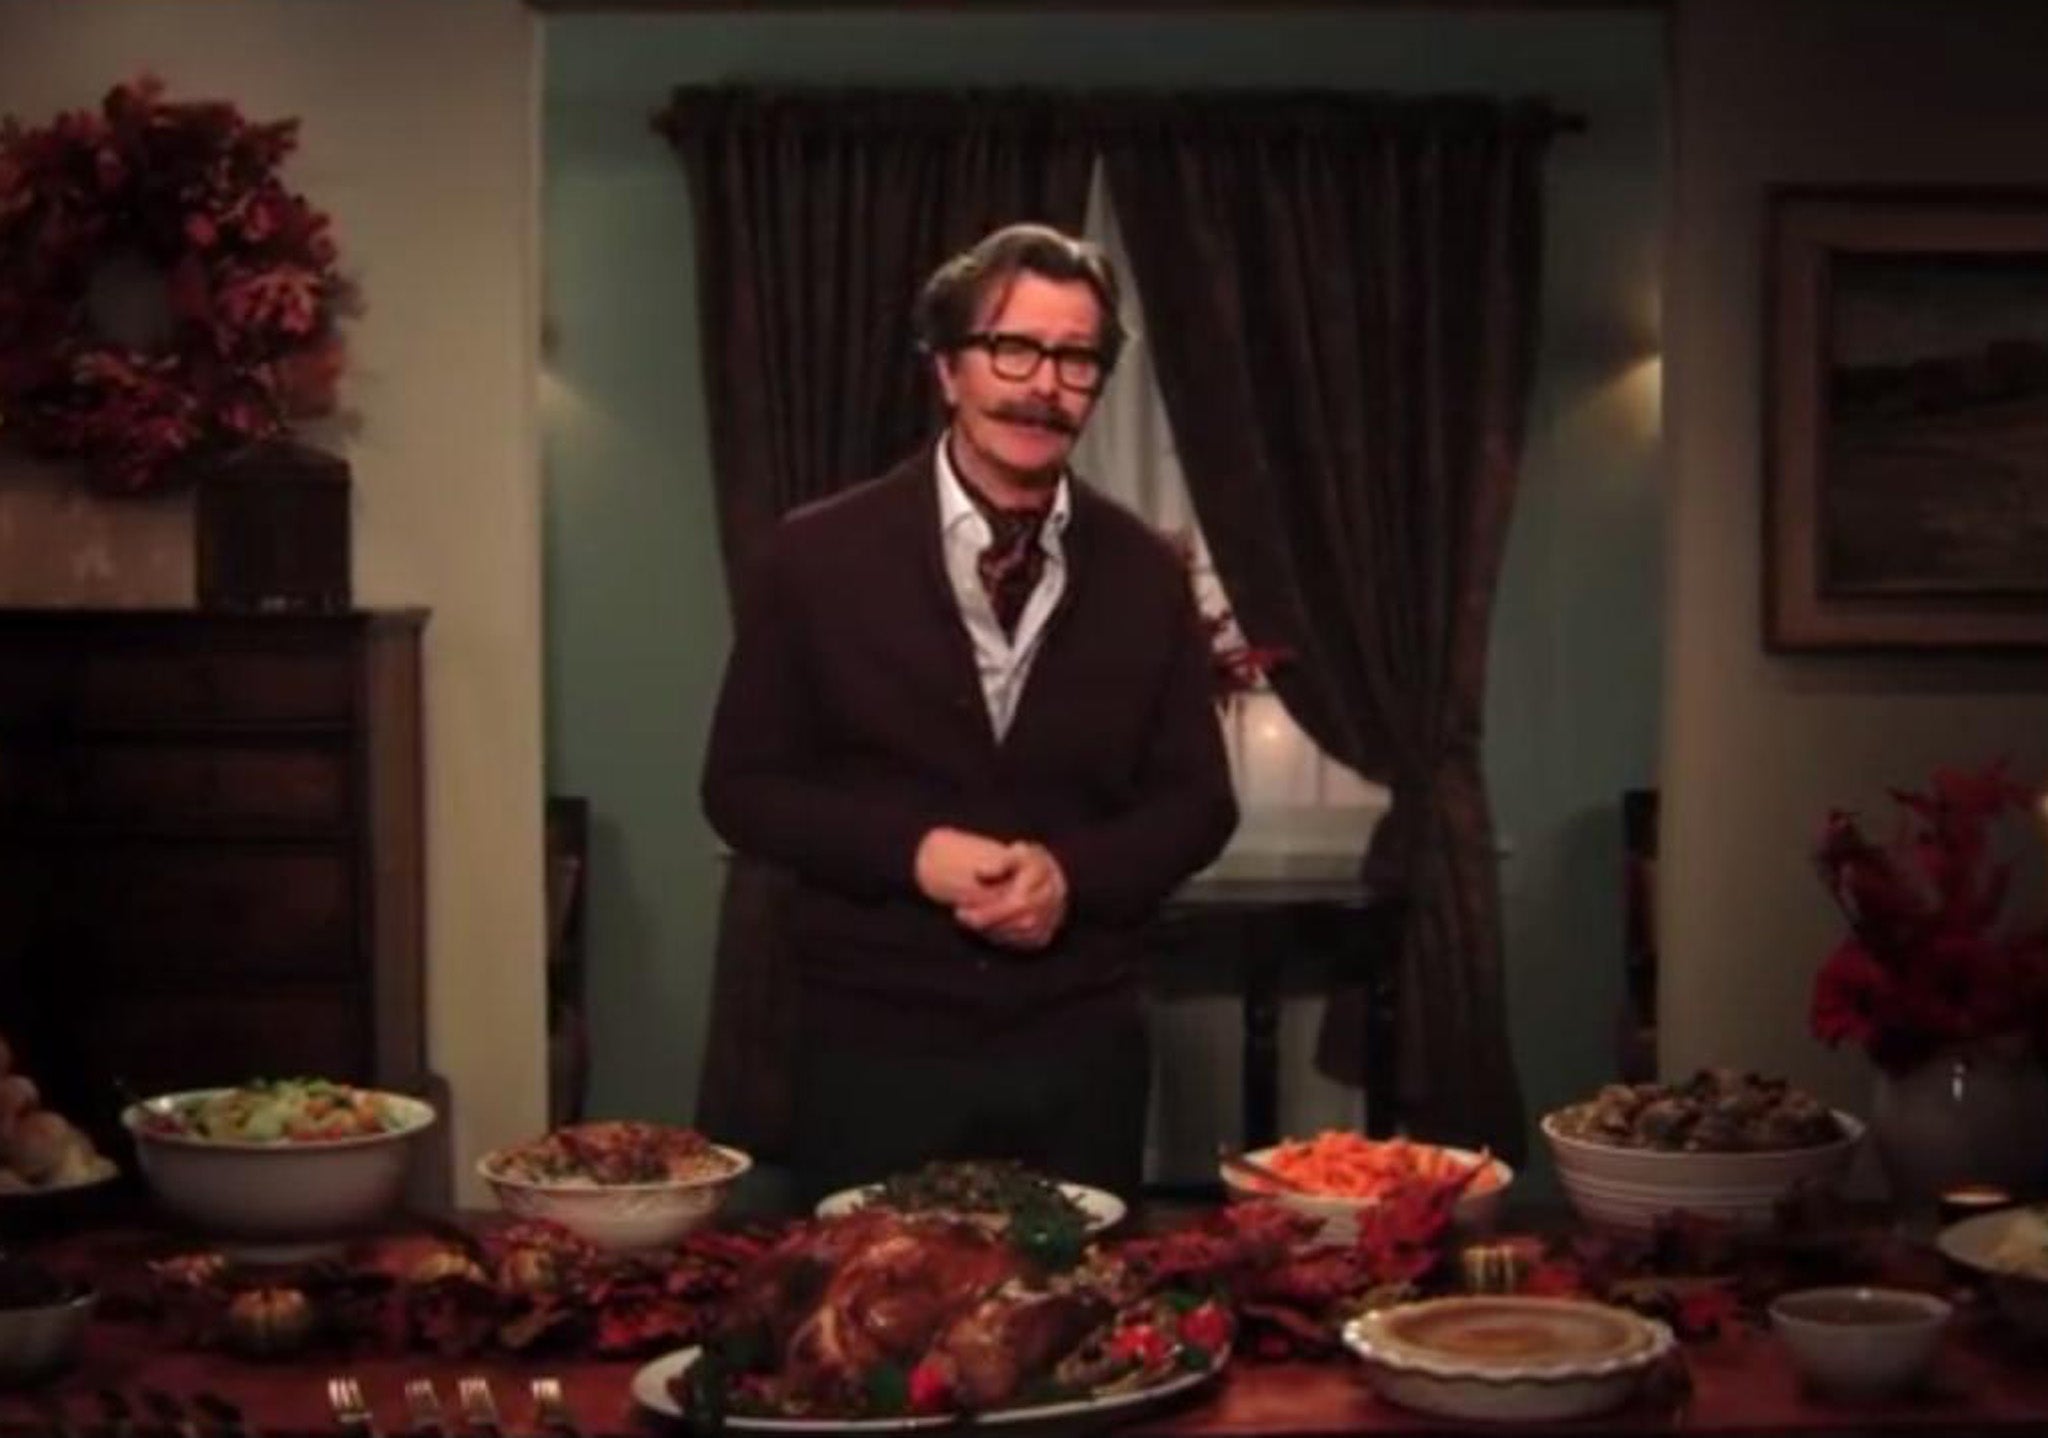 Gary OIdman delivers his anti-Thanksgiving message to the US